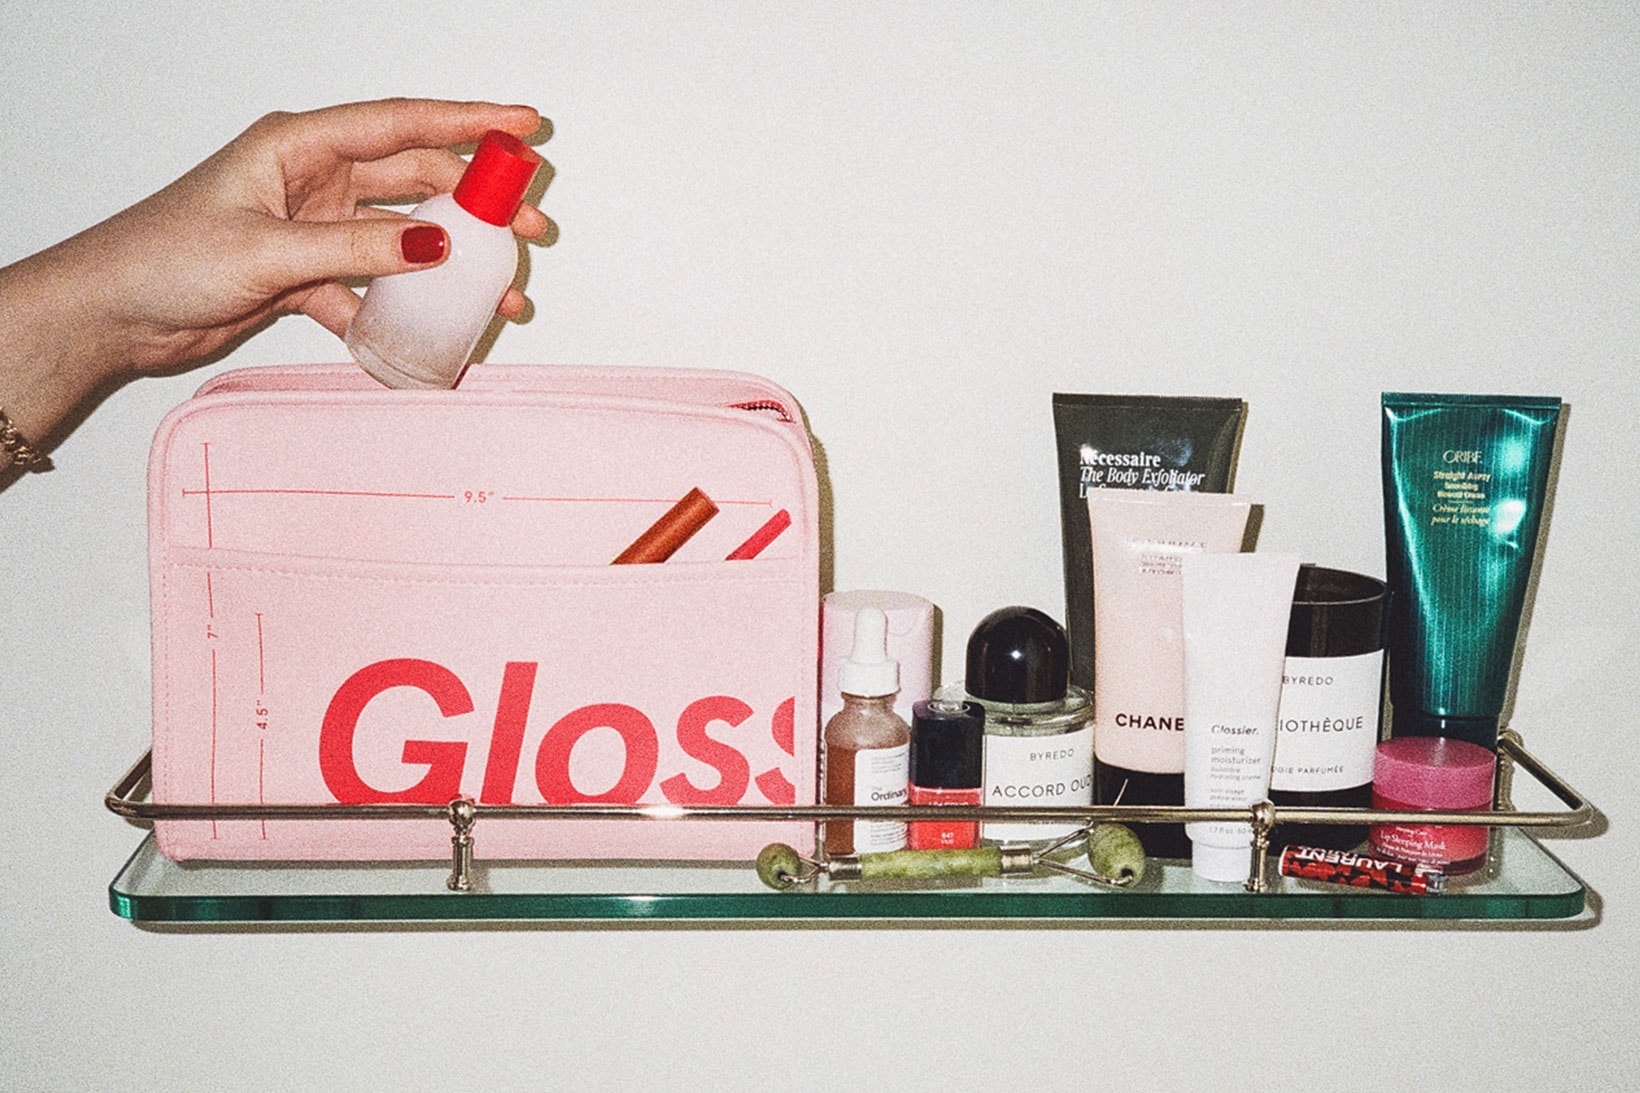 glossier the beauty bag pink red makeup skincare pouch bathroom sink shelf vanity